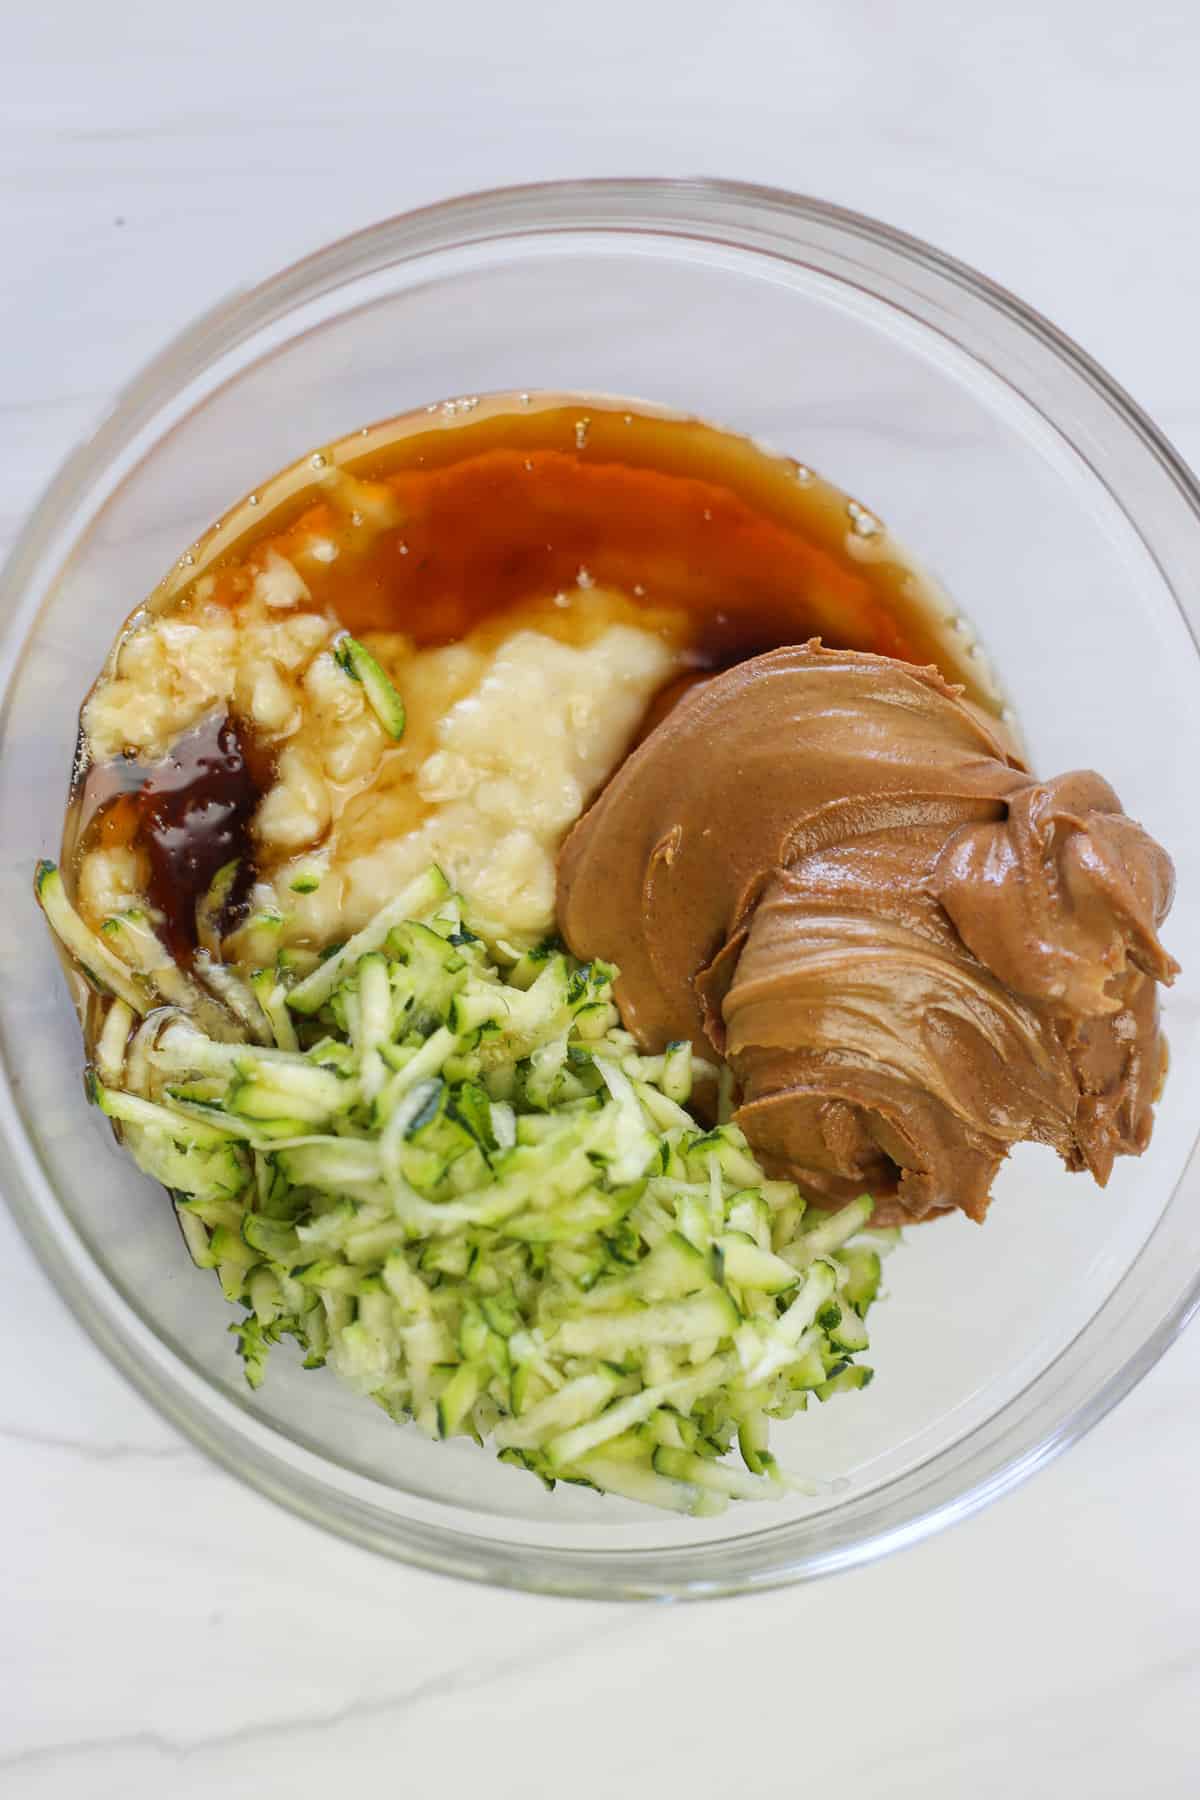 Mashed banana, shredded zucchini, real maple syrup, and creamy peanut butter in a glass bowl ready to be mixed.